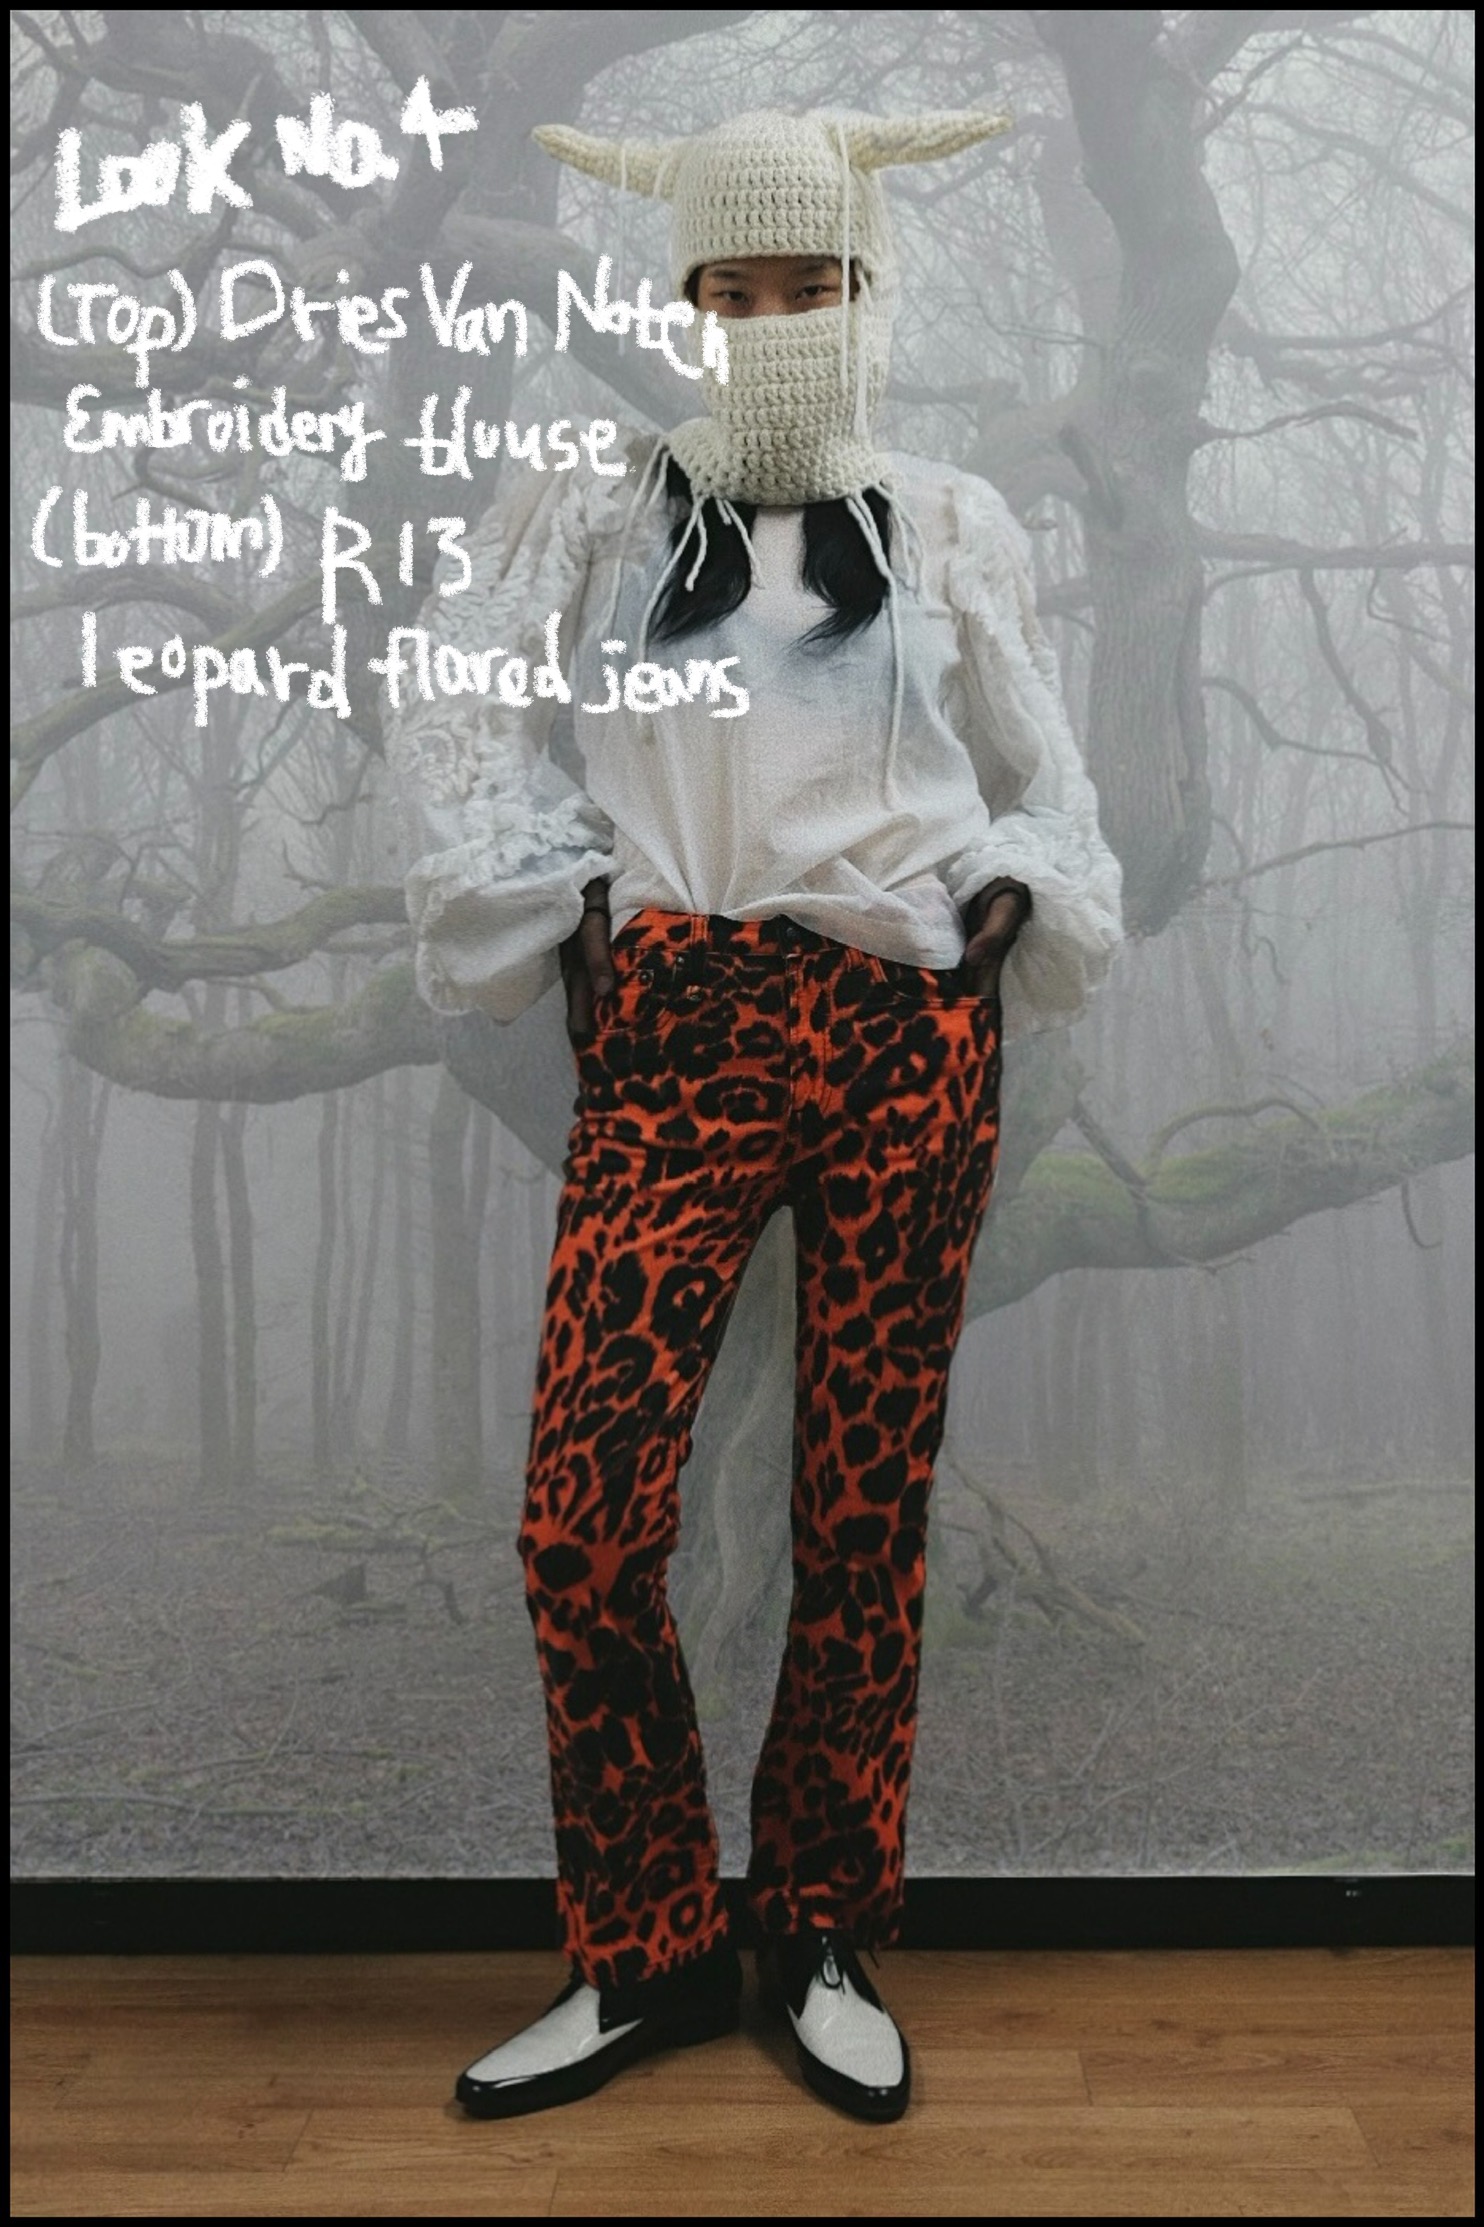 Look no.4 (one and only) Dries Van Noten embroidery blouse &amp; R13 leopard flared jeans